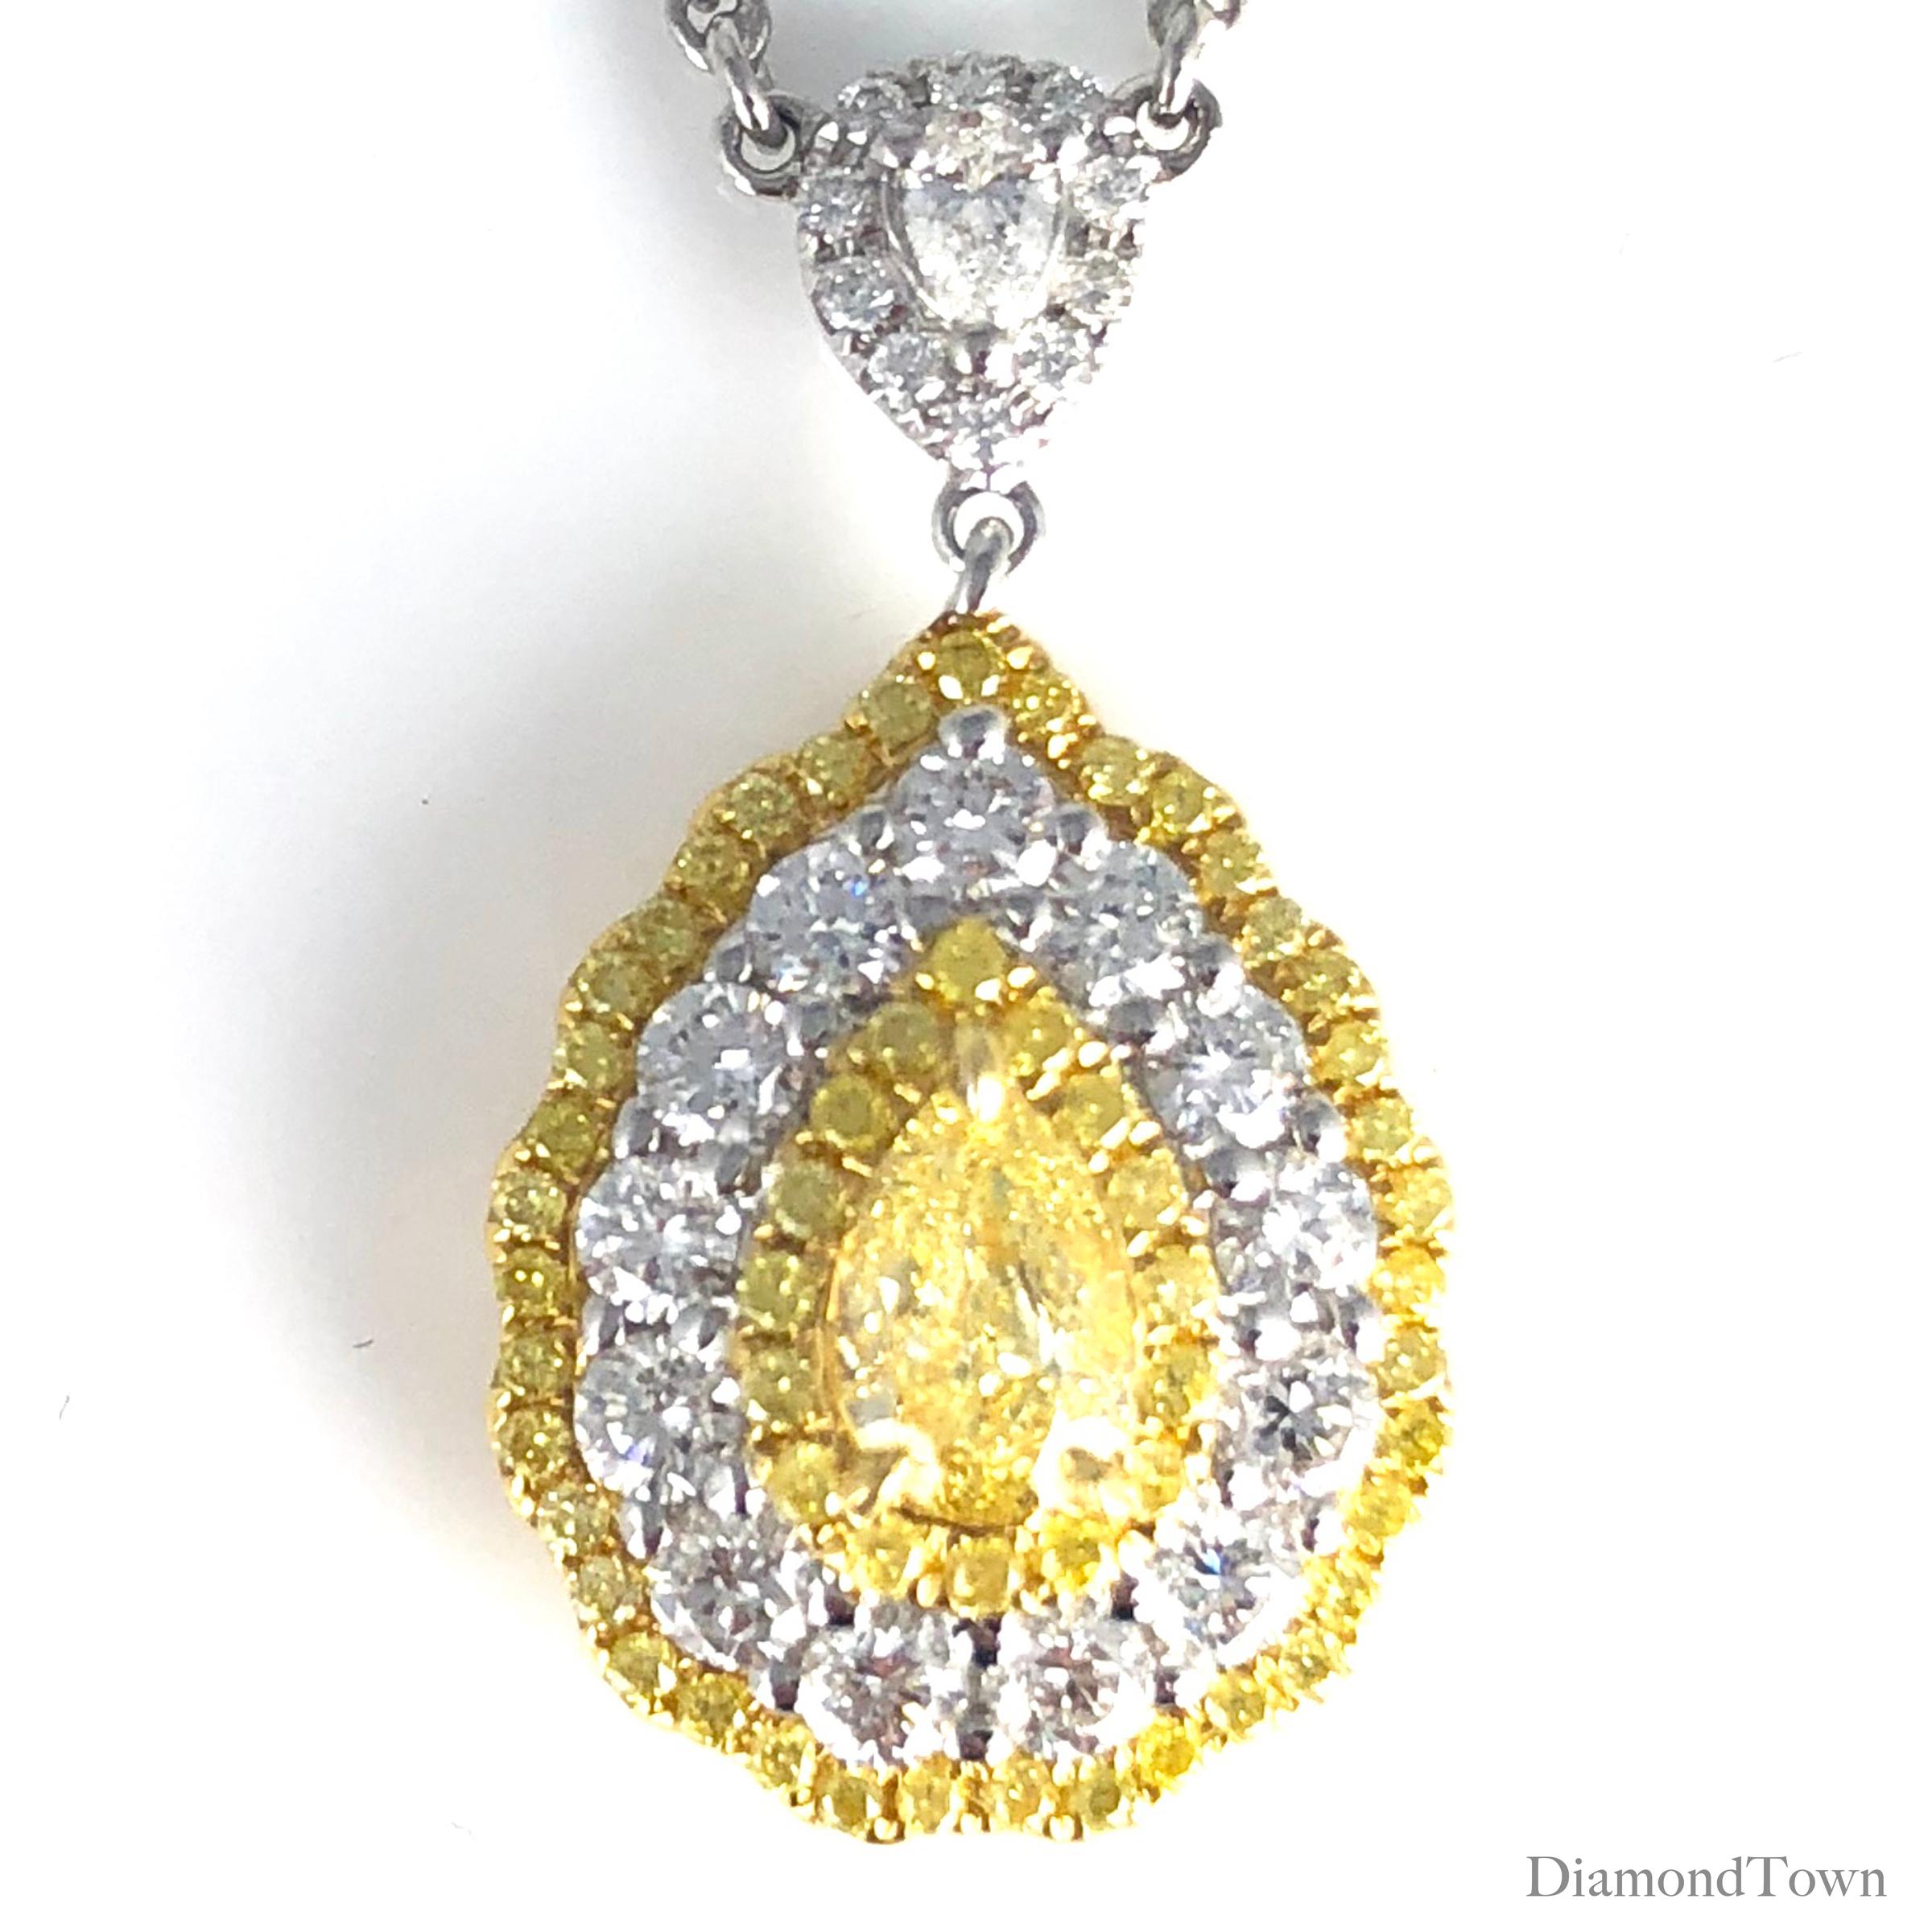 (DiamondTown) This stunning pendant features a GIA Certified 0.54 carat Pear Shape Yellow Diamond center, surrounded by a triple halo of round yellow and round white diamonds. Additional diamonds decorating the bail and along the chain bring the